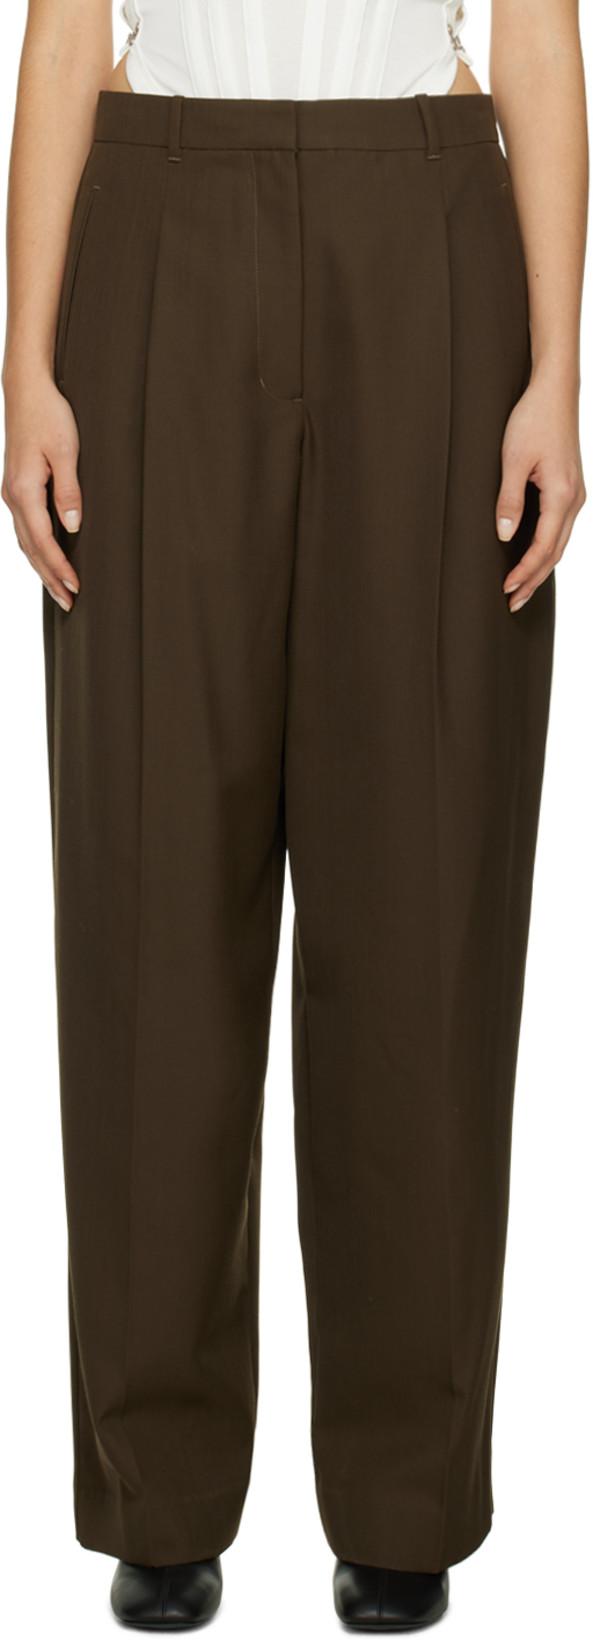 Green Tailored Trousers by 3.1 PHILLIP LIM